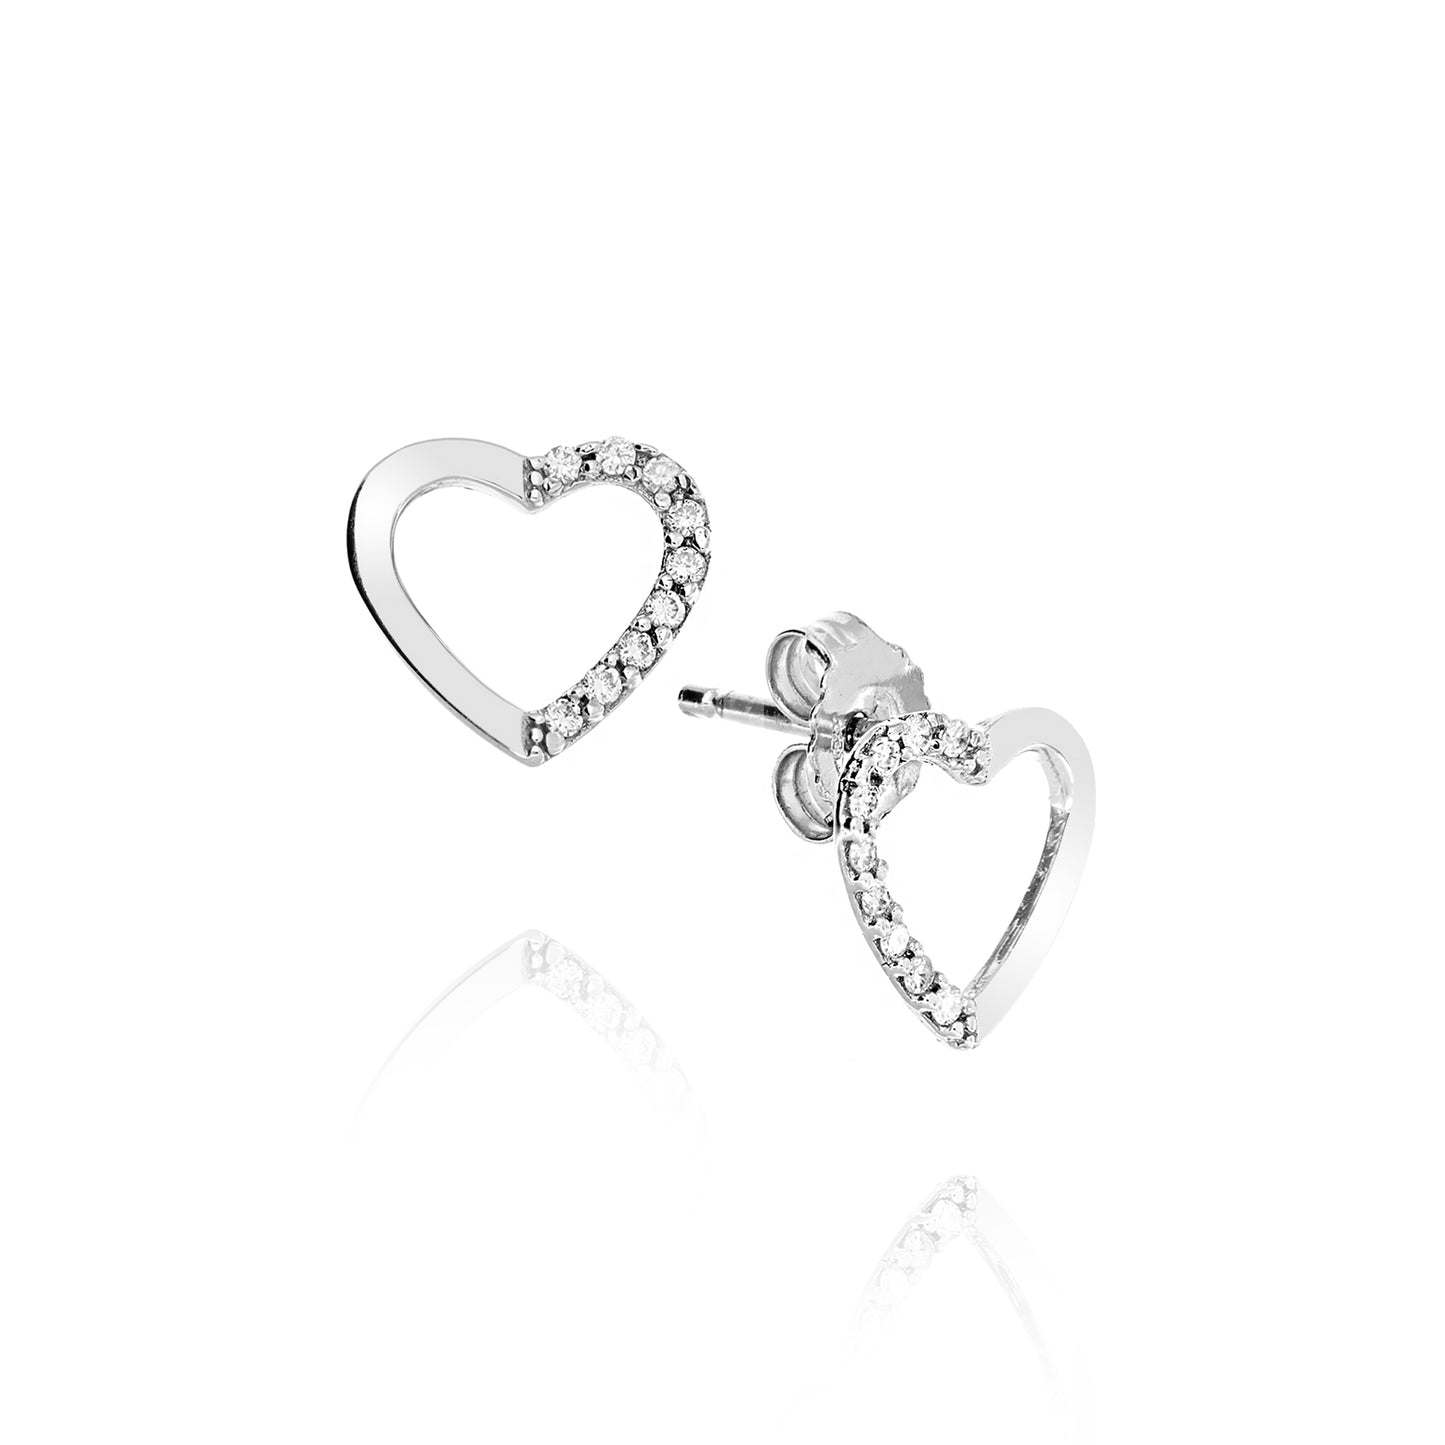 Real Gold Heart Earrings with 100% Natural Diamonds P.Ct 11 